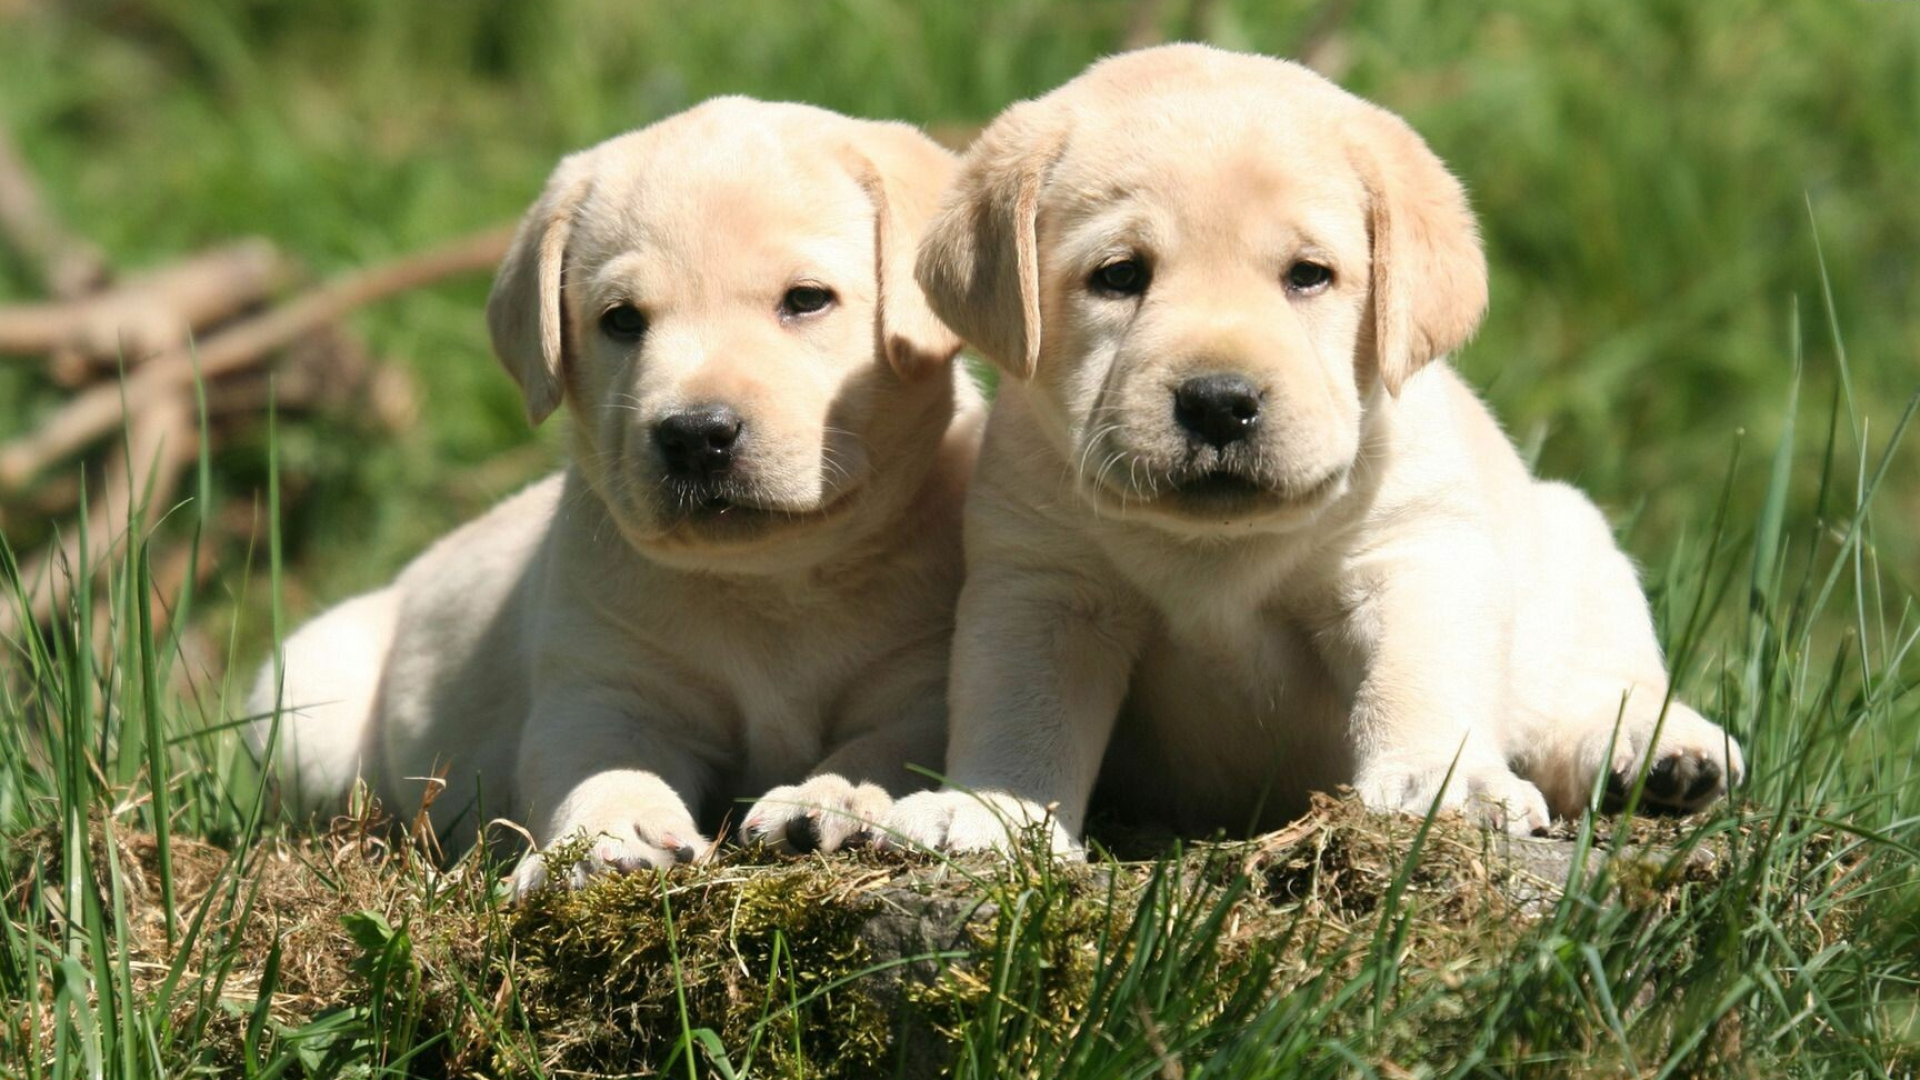 Labrador Retriever: Puppy, Among the most commonly kept dogs in the Western world. 1920x1080 Full HD Background.